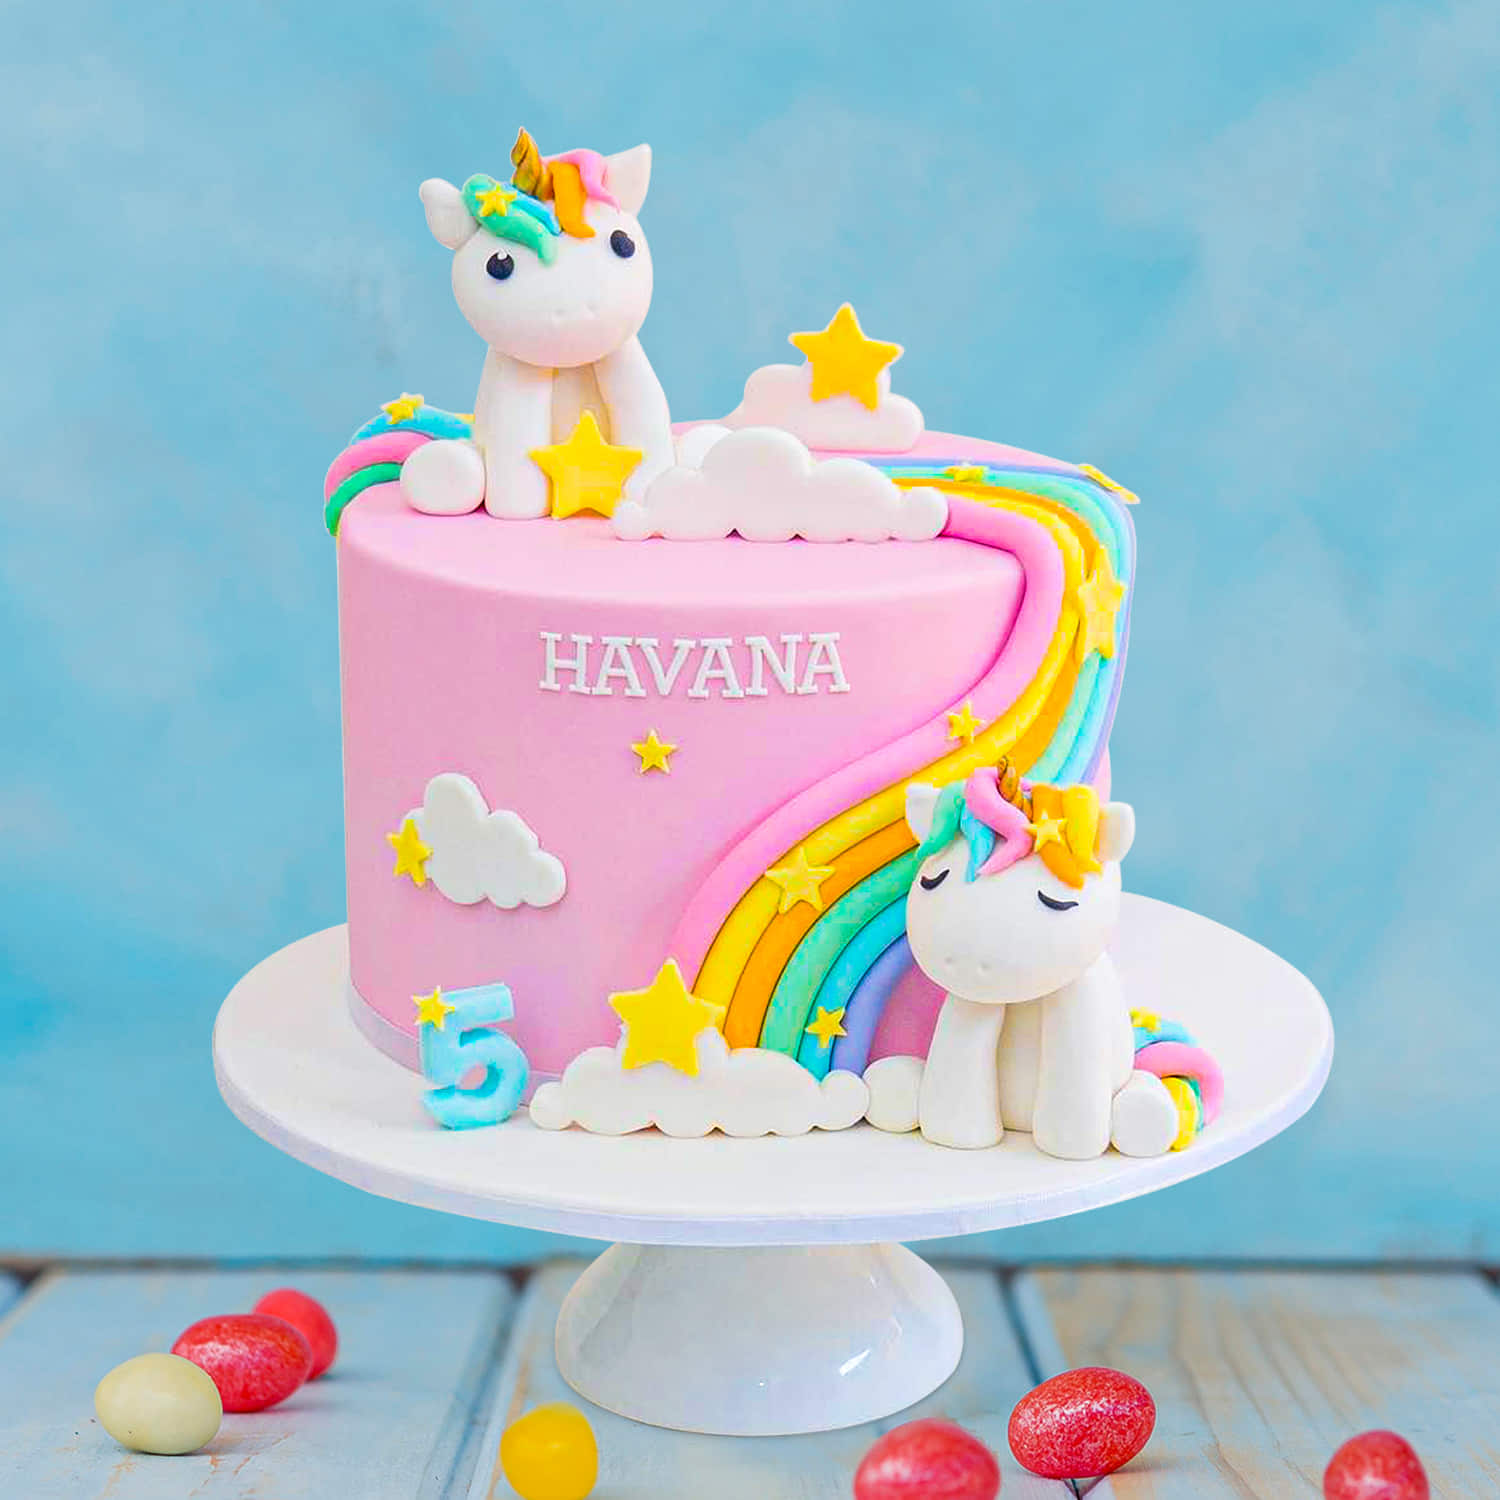 Easy Birthday Cake Decorating Ideas You Can Do! - It's Always Autumn